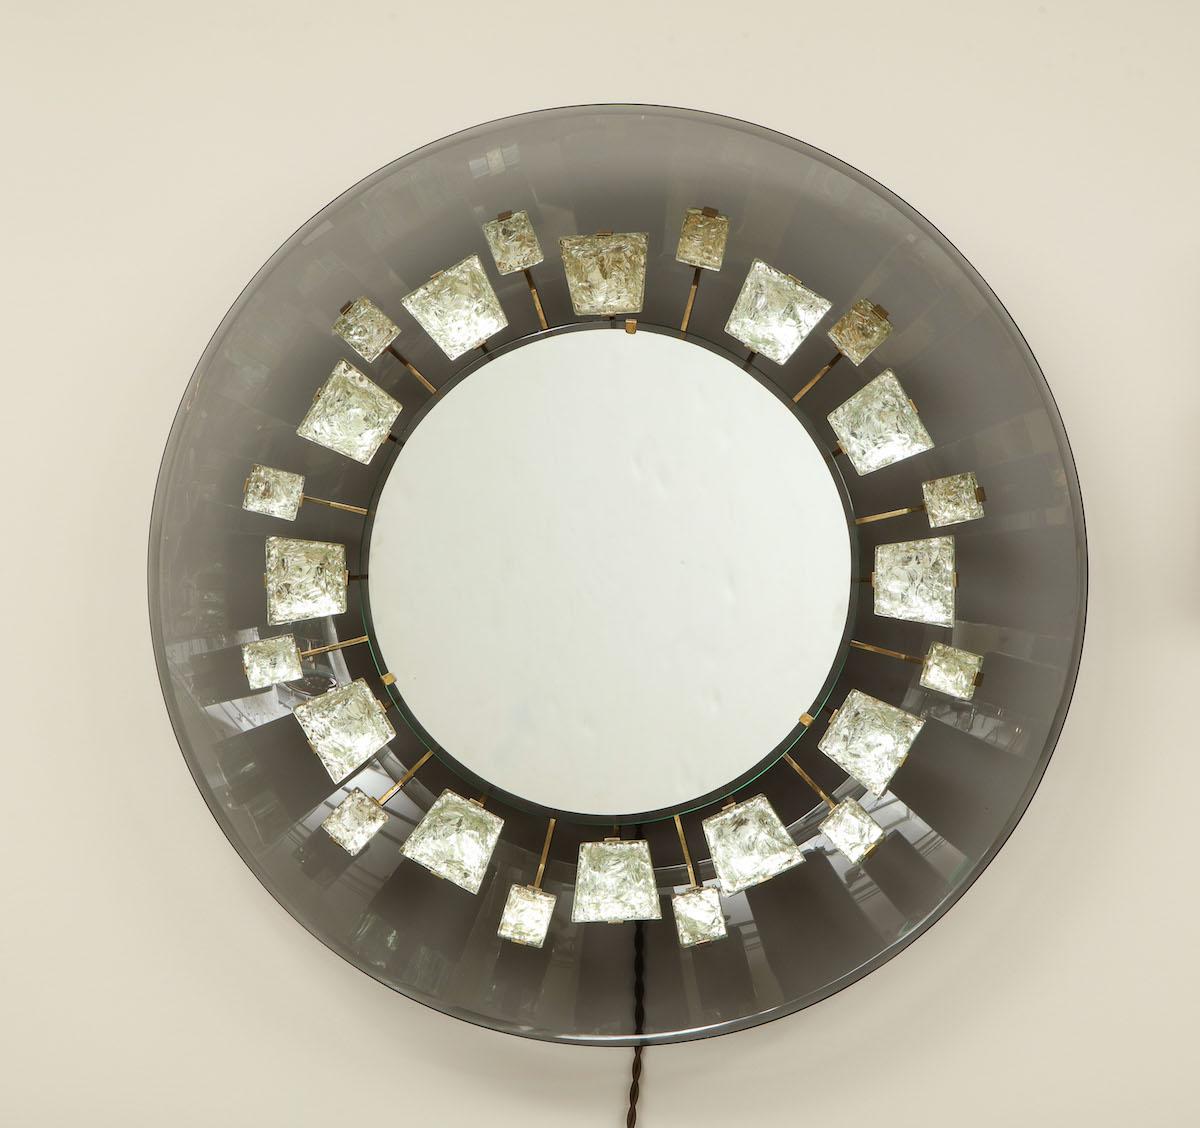 Rare Illuminated mirror by Max Ingrand. Model # 2044, featuring 24 chipped crystal chunks attached to articulating brass arms. Curved back-plate of smoked gray colored glass and center mirror concealing 3 candelabra sockets. This model dates to 1966